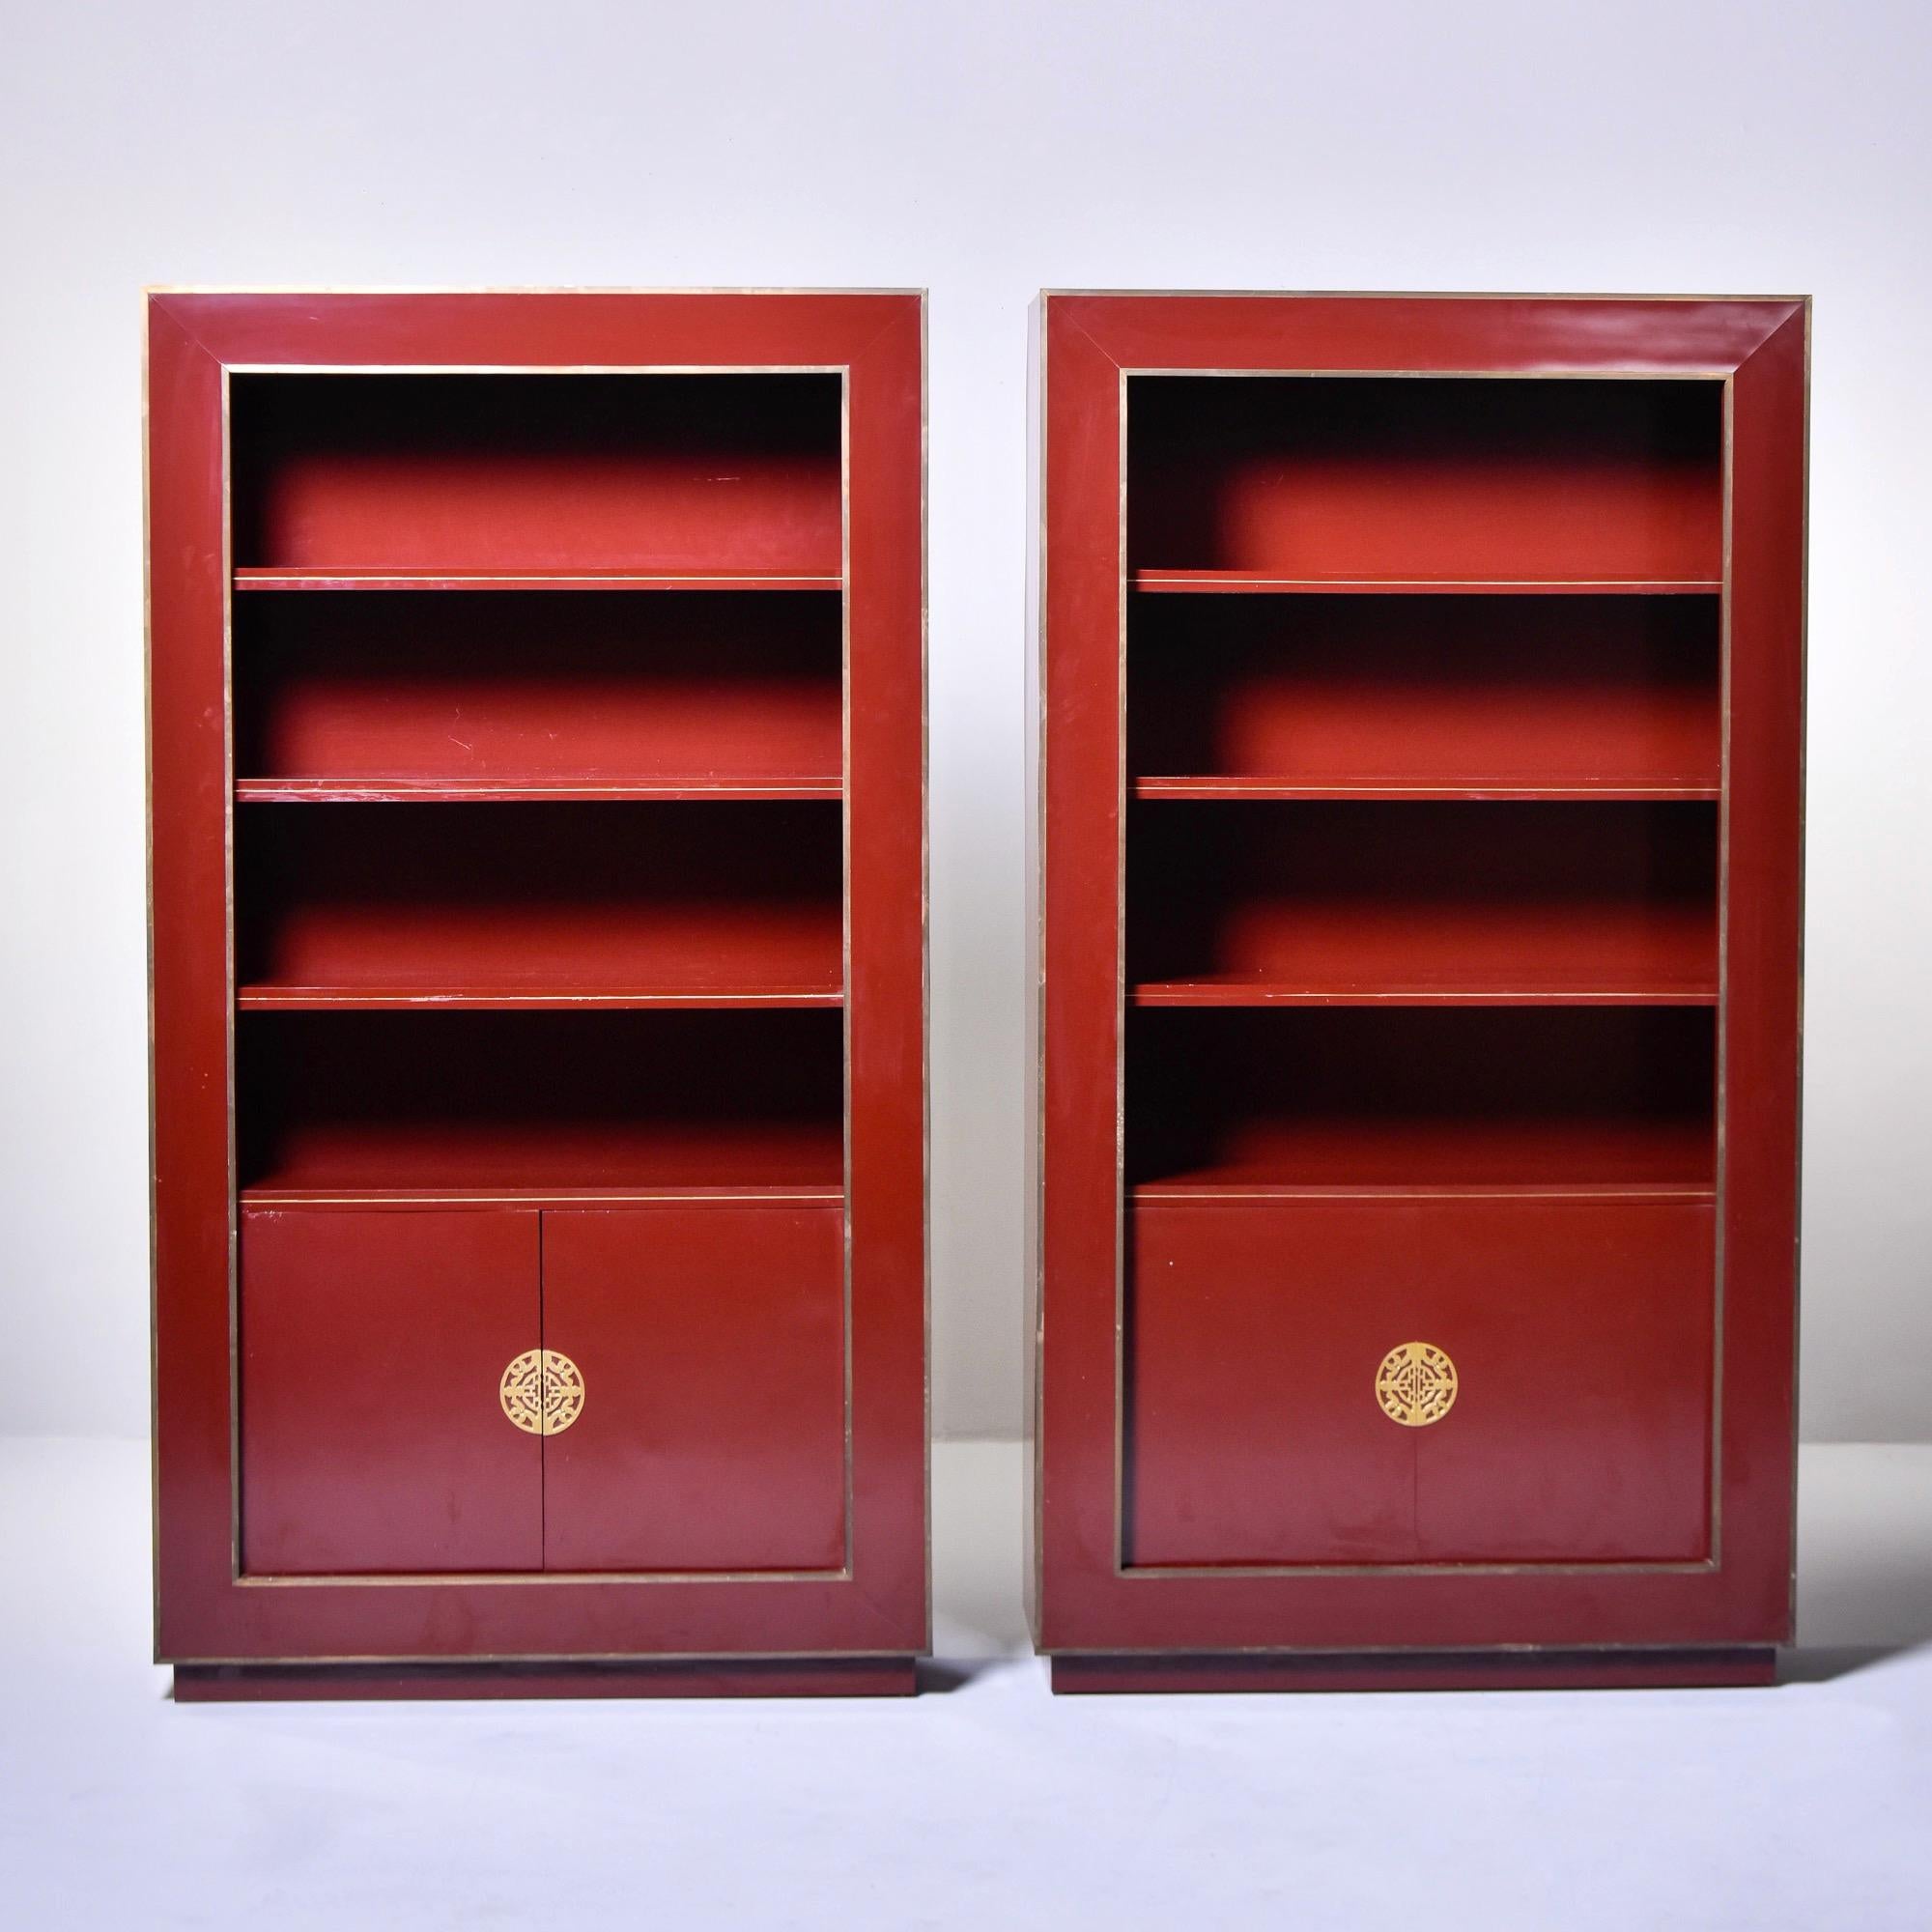 Found in Europe, this pair of Chinoiserie style shelf cabinets date from the 1970s. These are in a dark, ox blood red lacquer with brass trim and hardware. Each cabinet has three adjustable shelves on the top section and one adjustable shelf behind